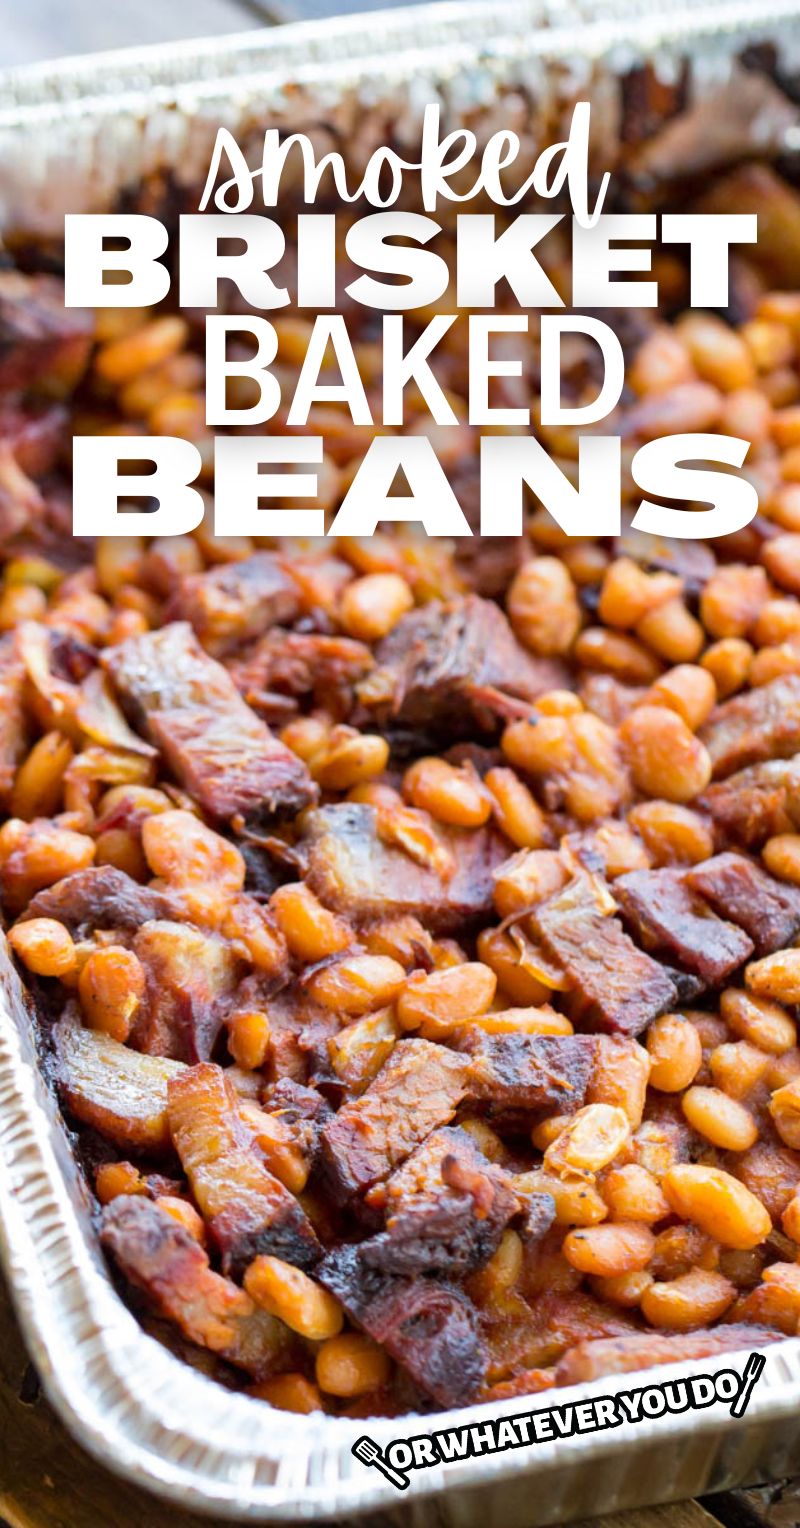 Smoked Brisket Baked Beans